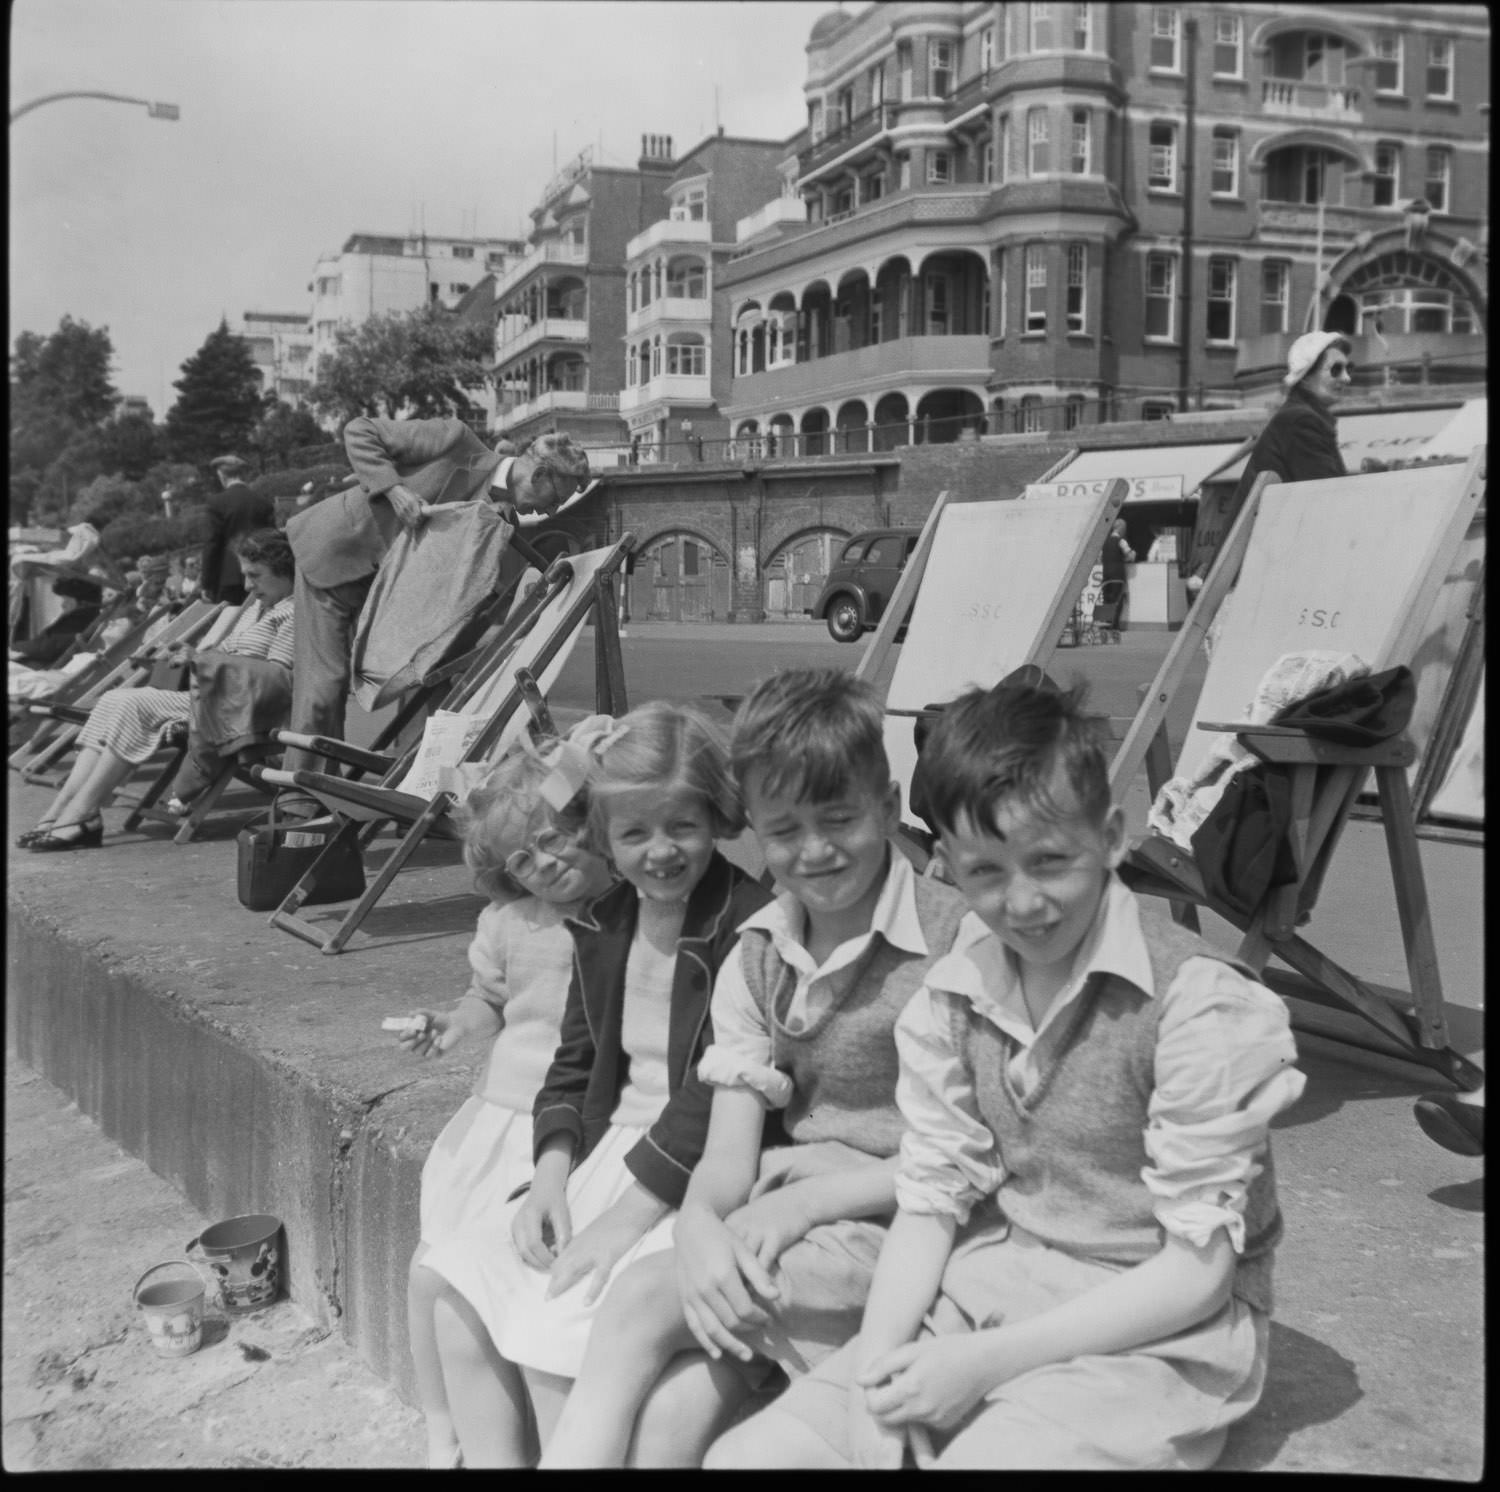 Children sitting down by the beach in Southend. A Rossi ice cream shop behind them. It's the 1950s.